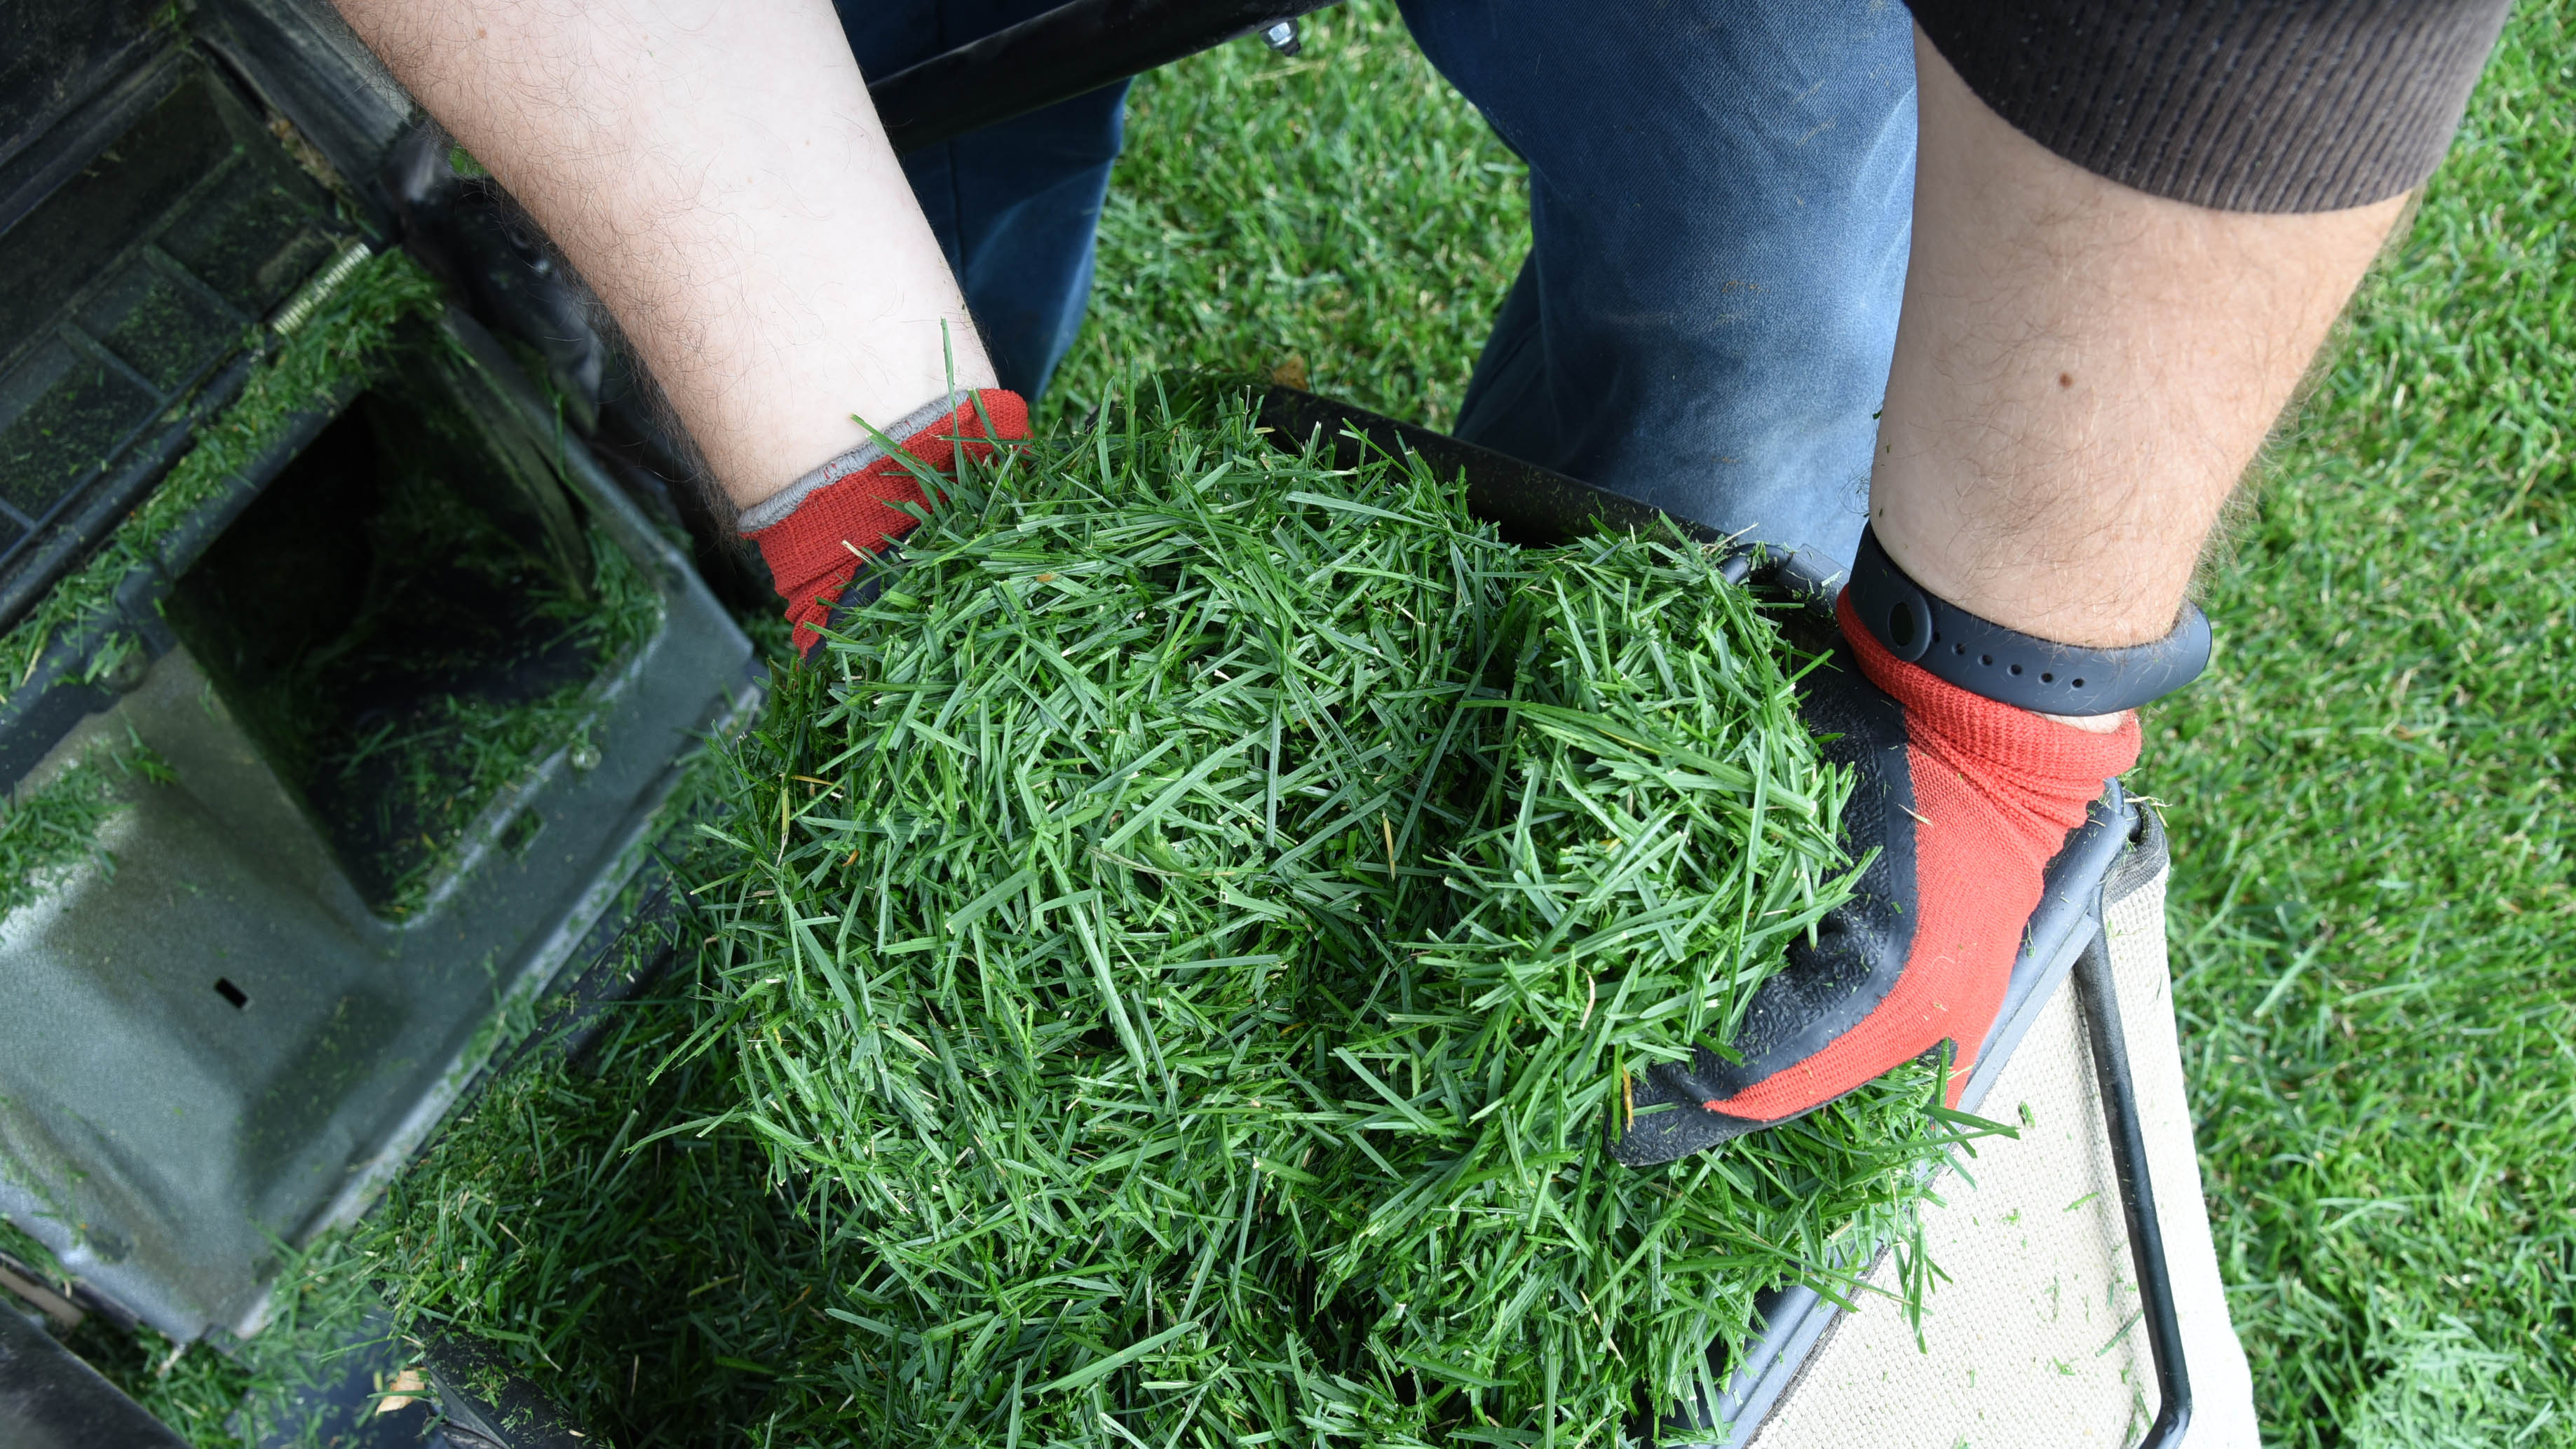 Holding grass clippings